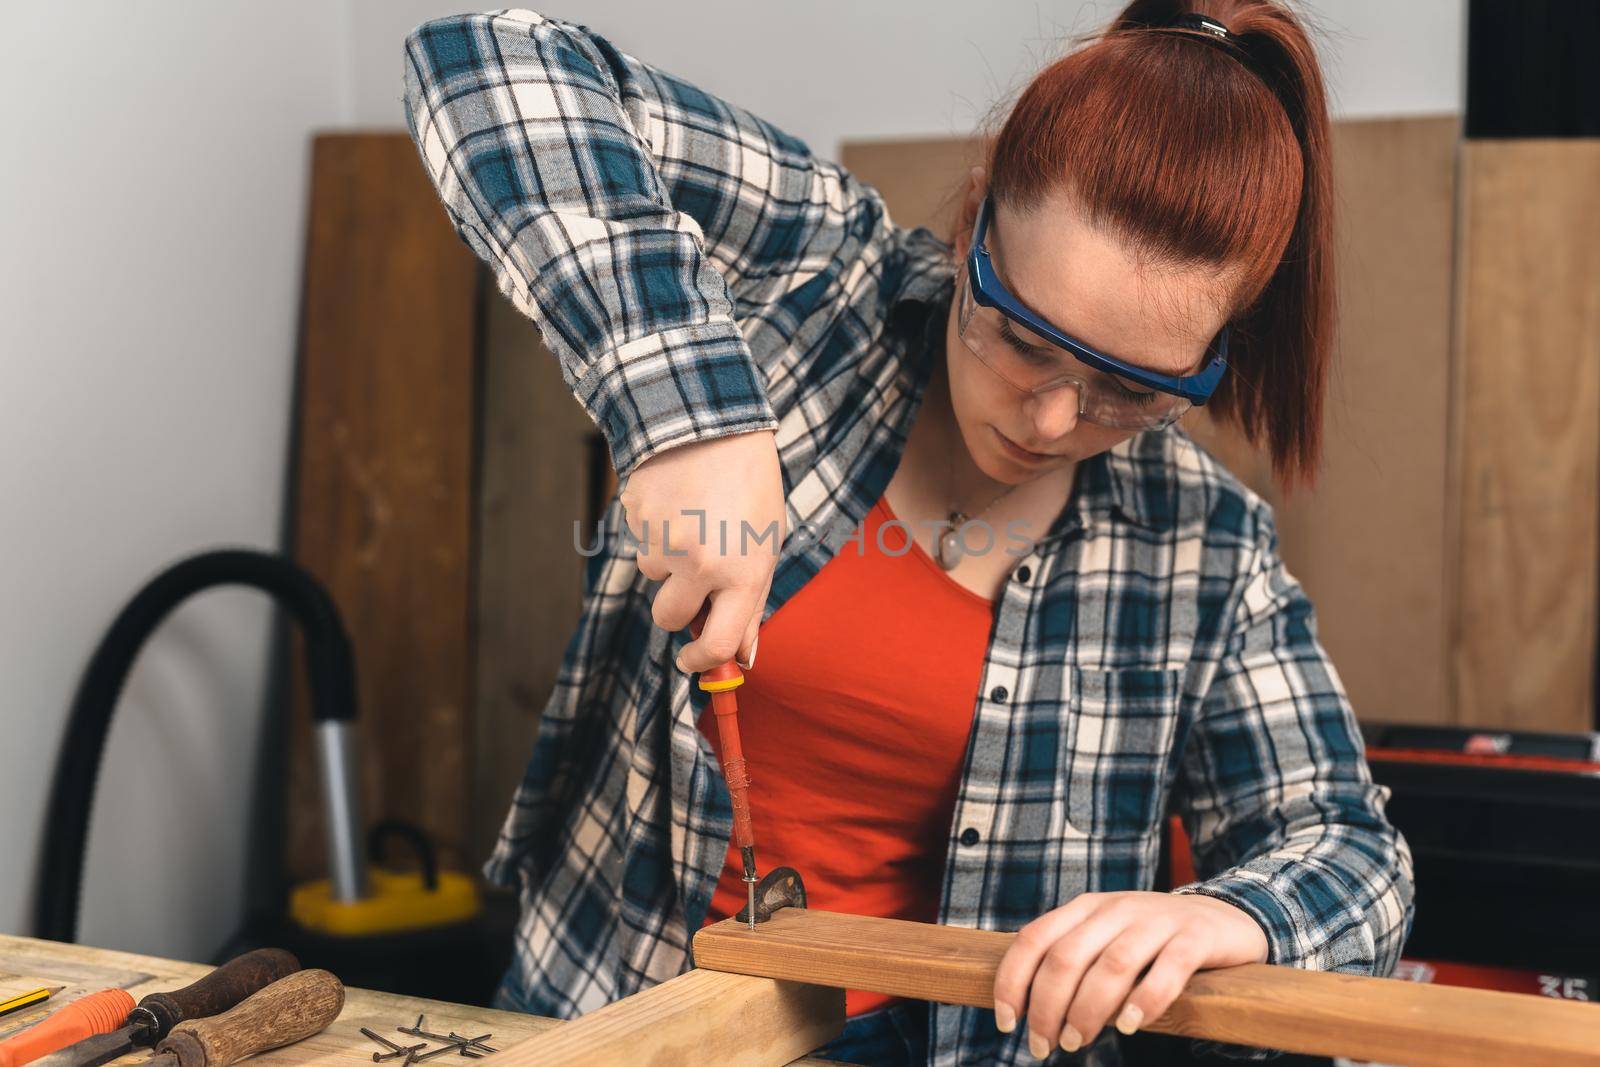 Detail of the hands of a young red-haired carpenter woman, concentrated and precise, working on the design of the wood in a small carpentry workshop, dressed in a blue checked shirt and a red t-shirt. woman carpenter screwing a screw into a wooden plank. Warm light indoors, background with wooden slats. Horizontal.